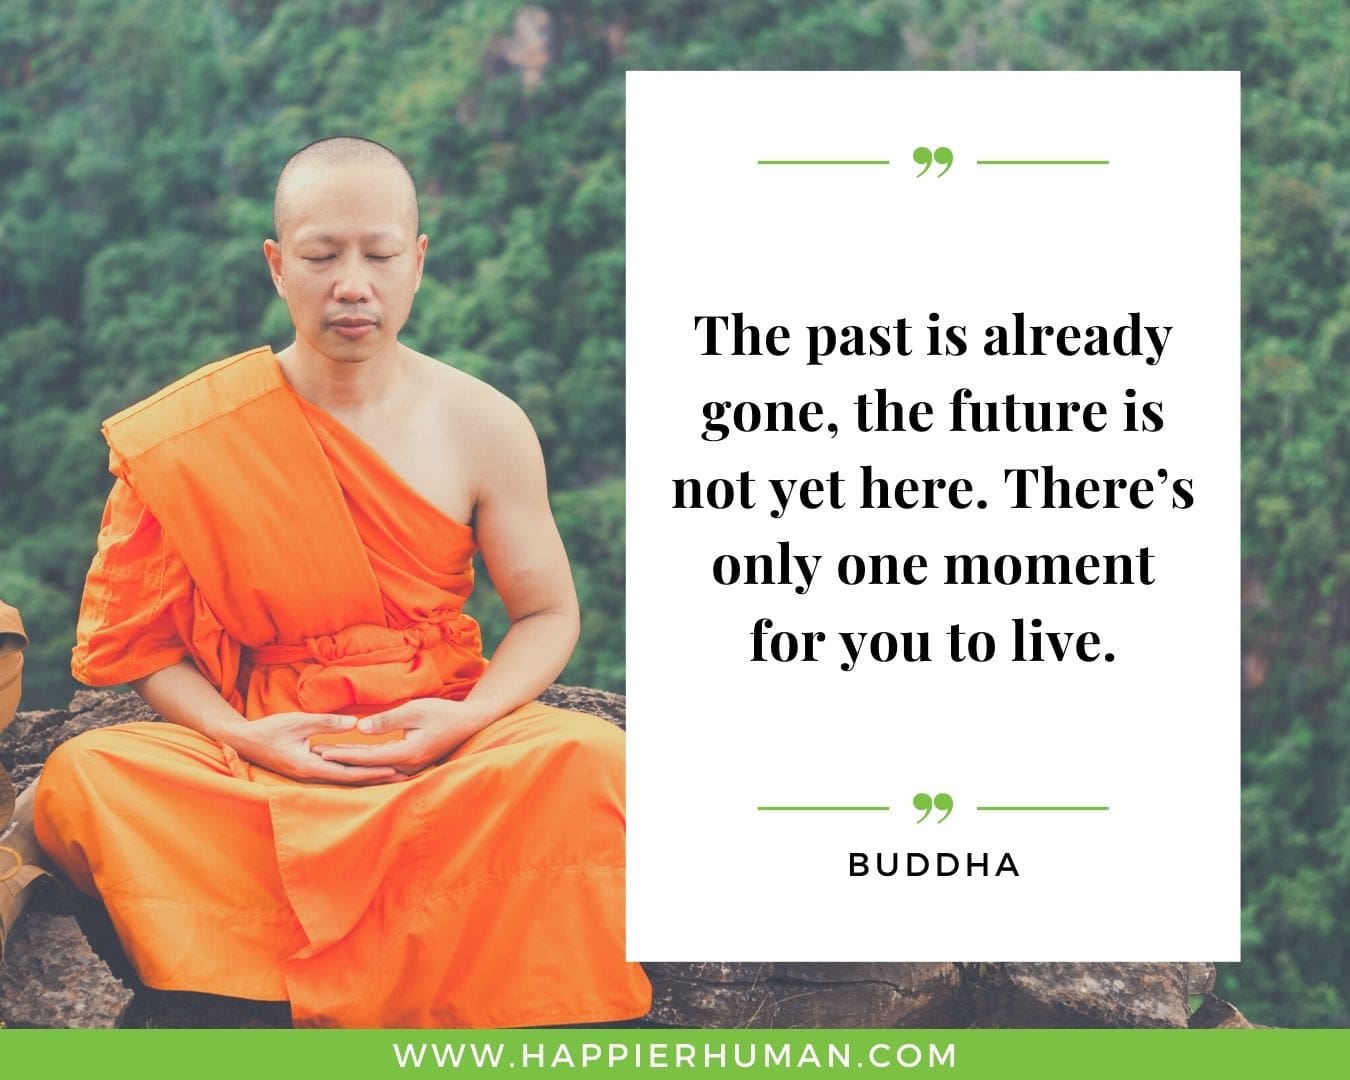 Positive Energy Quotes - “The past is already gone, the future is not yet here. There’s only one moment for you to live.” - Buddha